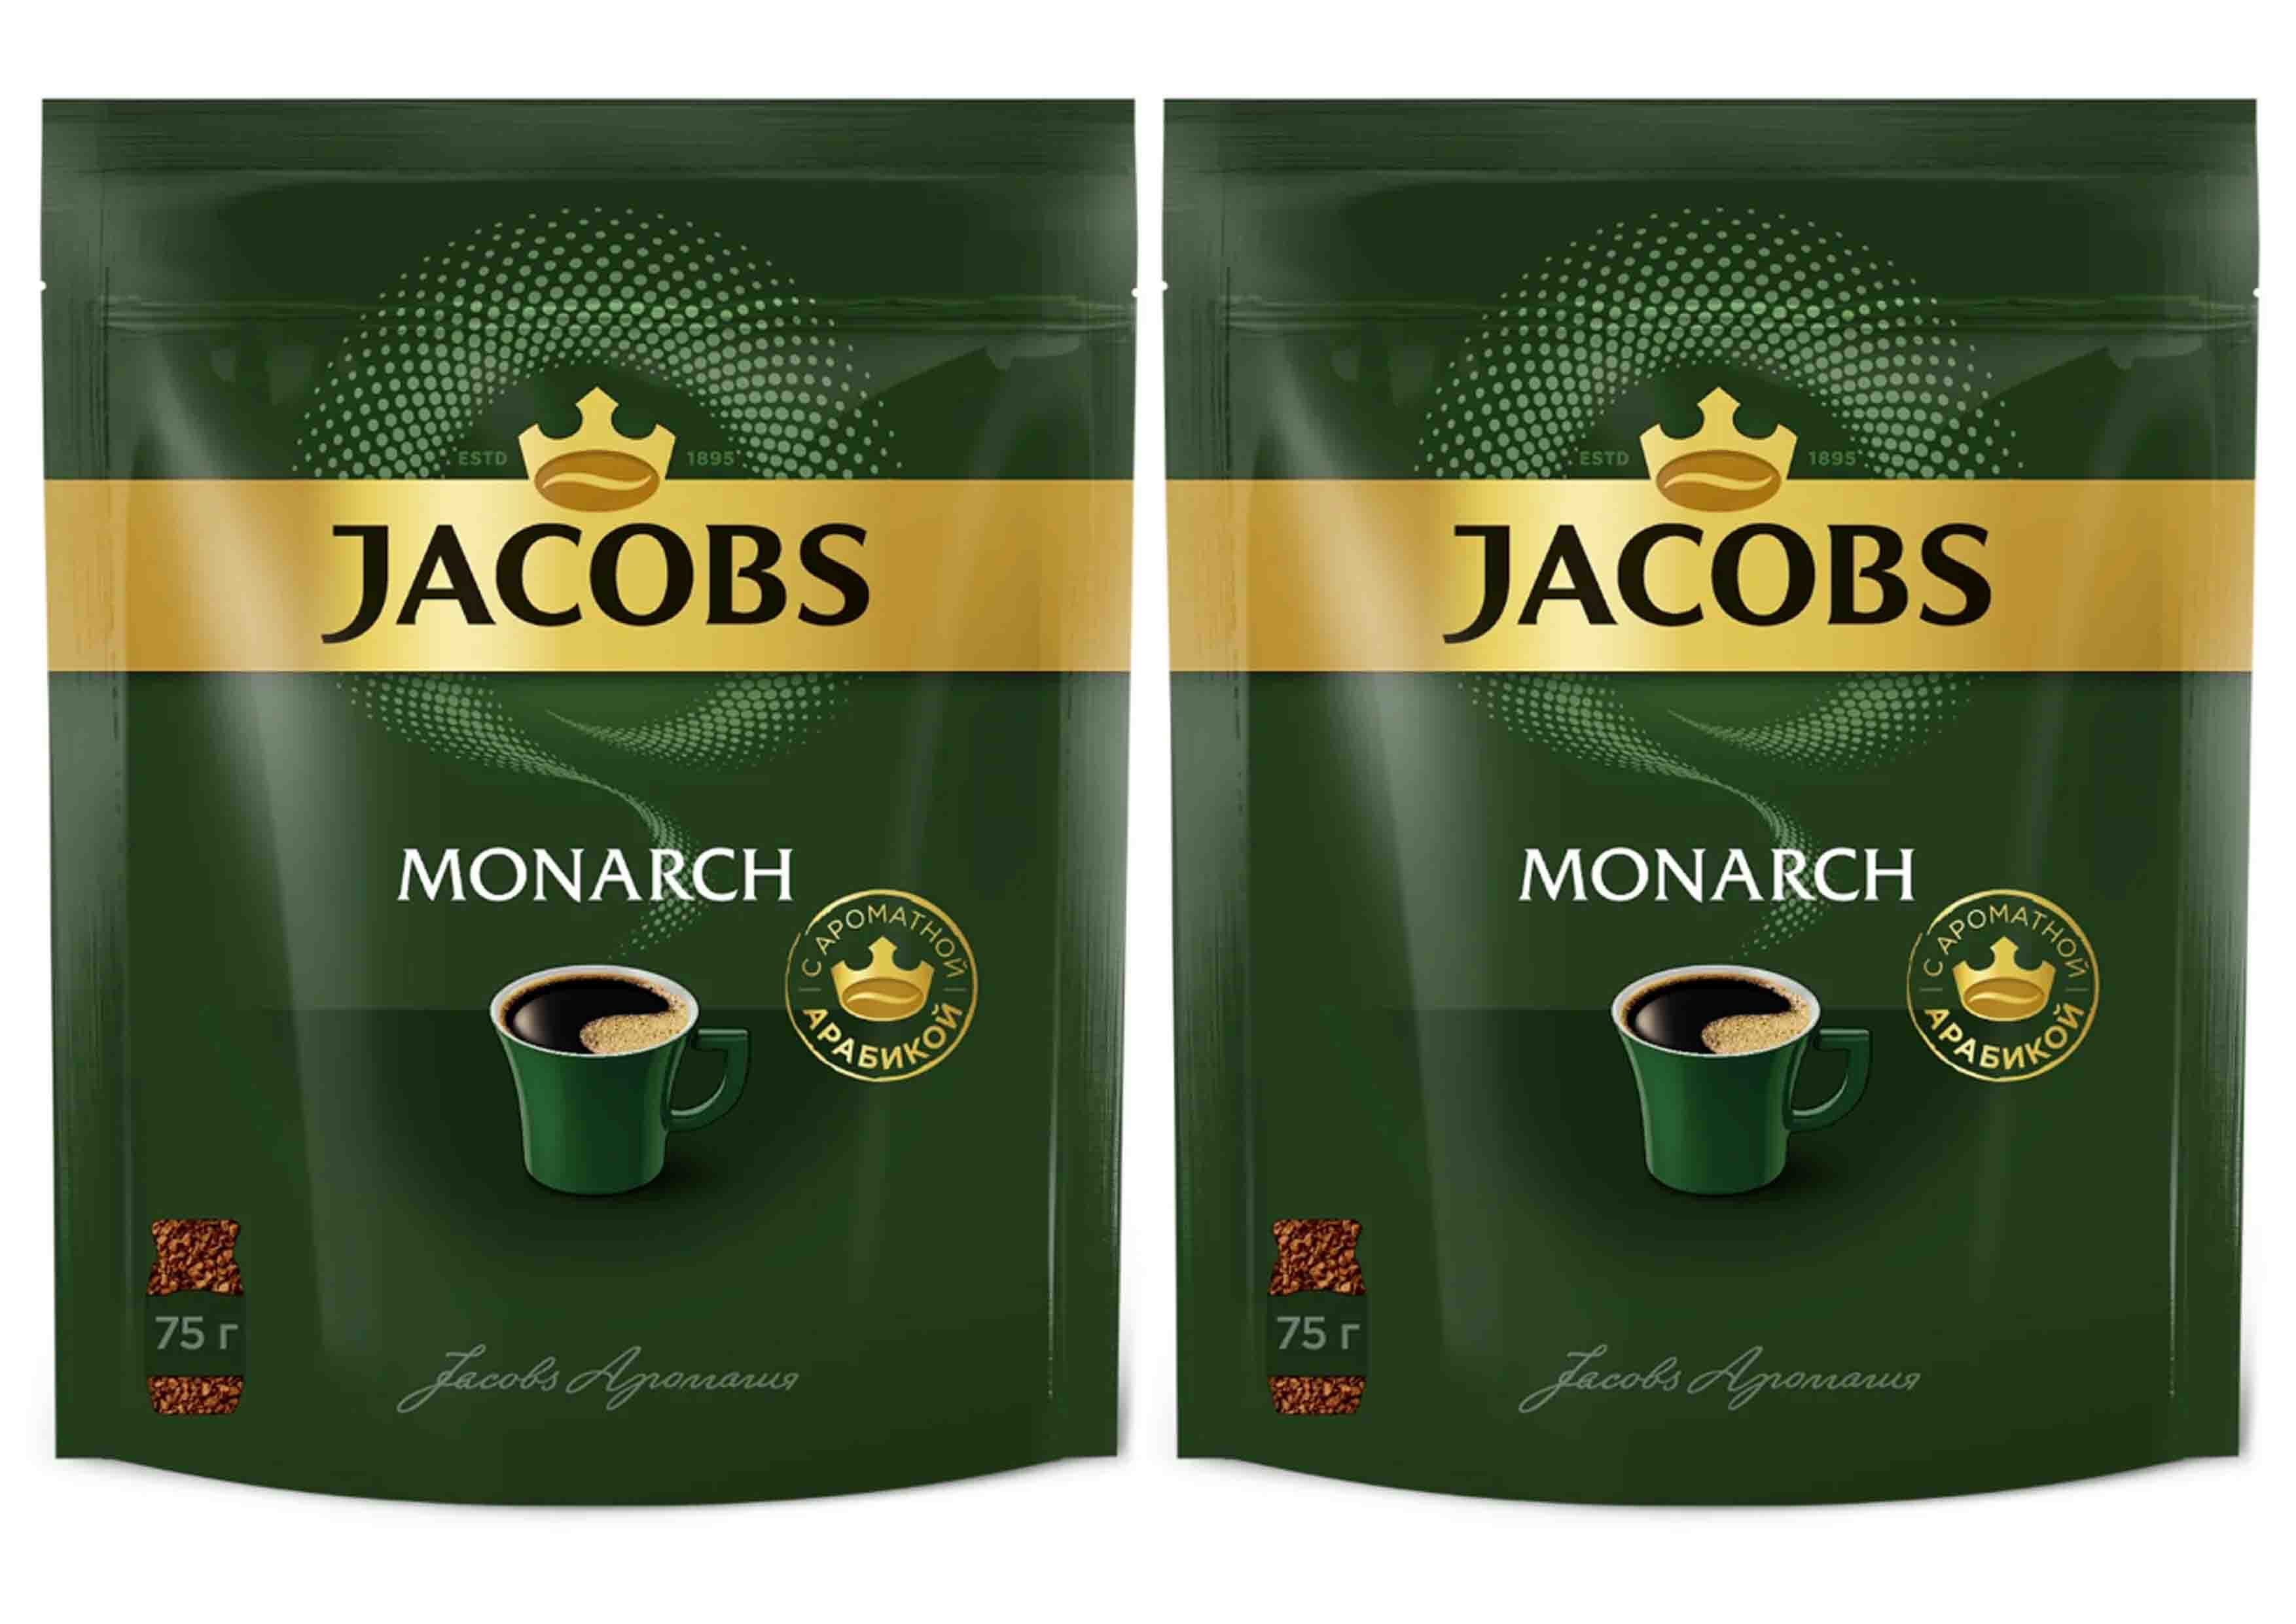 Looking to Brew Up a Storm with Your Coffee: Why Jacobs Kronung Pods Are the Superior Choice